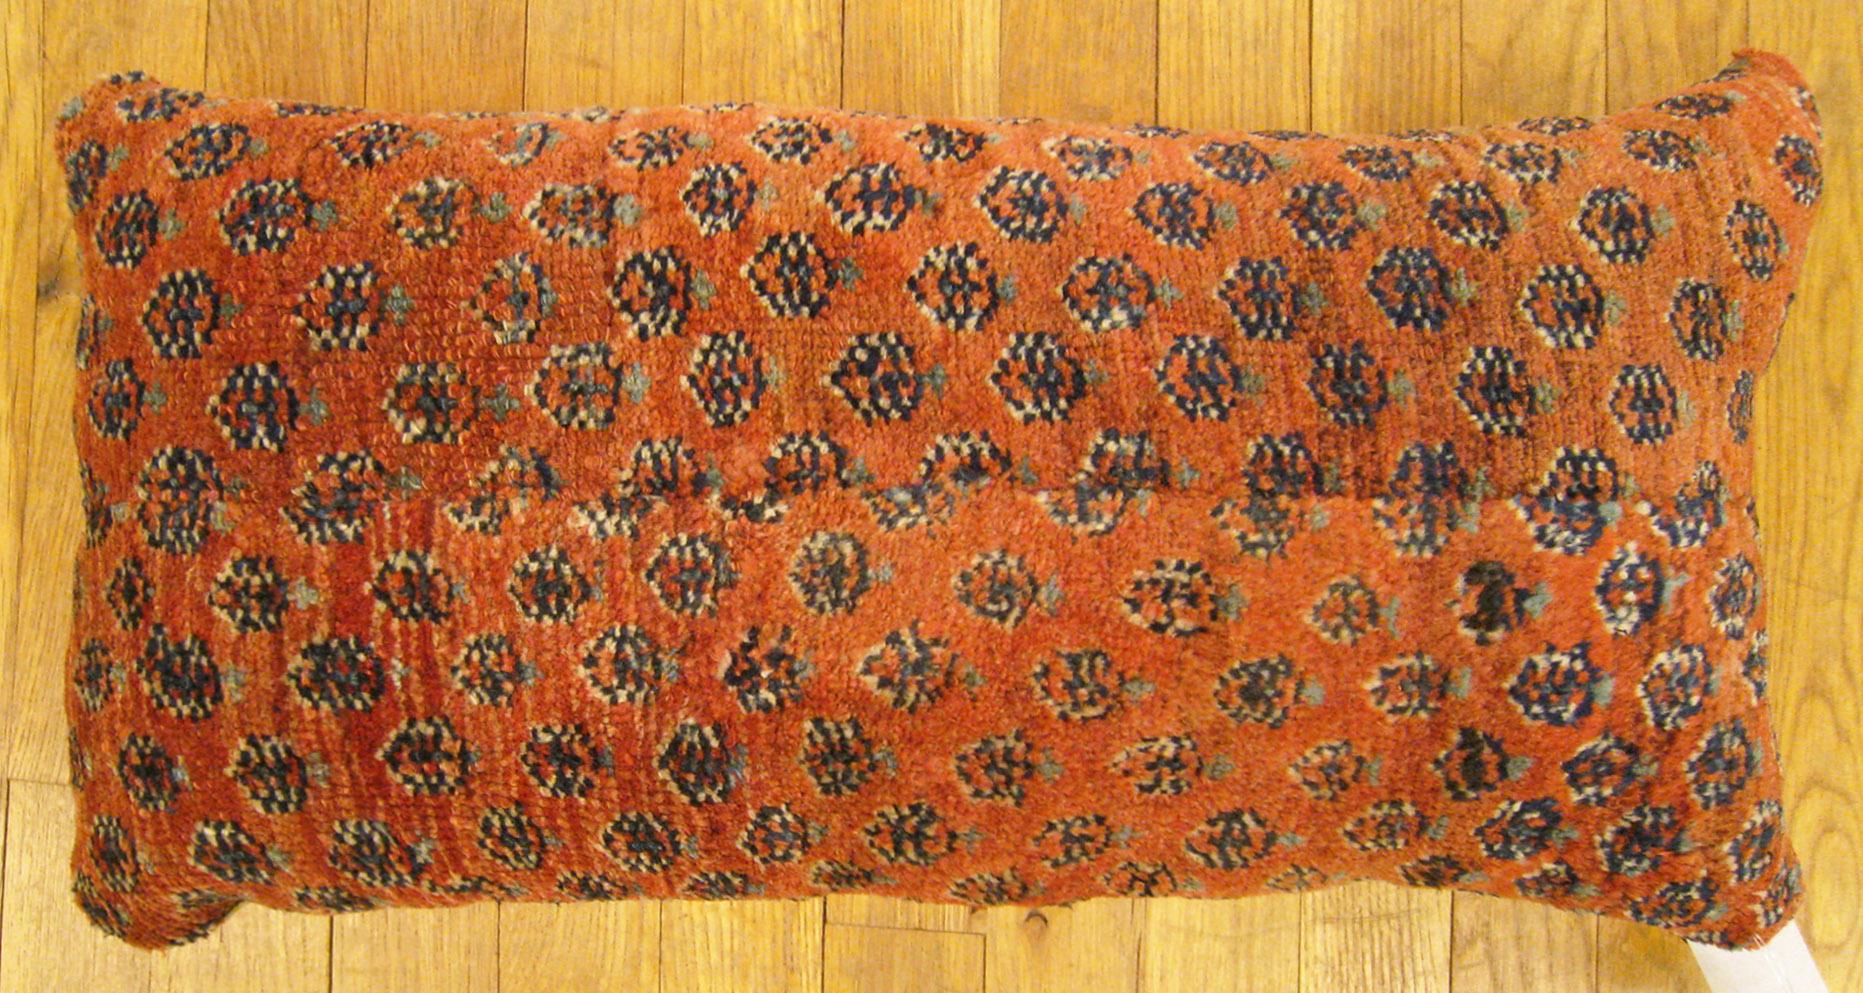 Antique Persian Saraband carpet pillow; size 2'0” x 1'2”.

An antique decorative pillow with floral elements allover a red central field, size 2'0” x 1'2”. This lovely decorative pillow features an antique fabric of a Saraband carpet on front